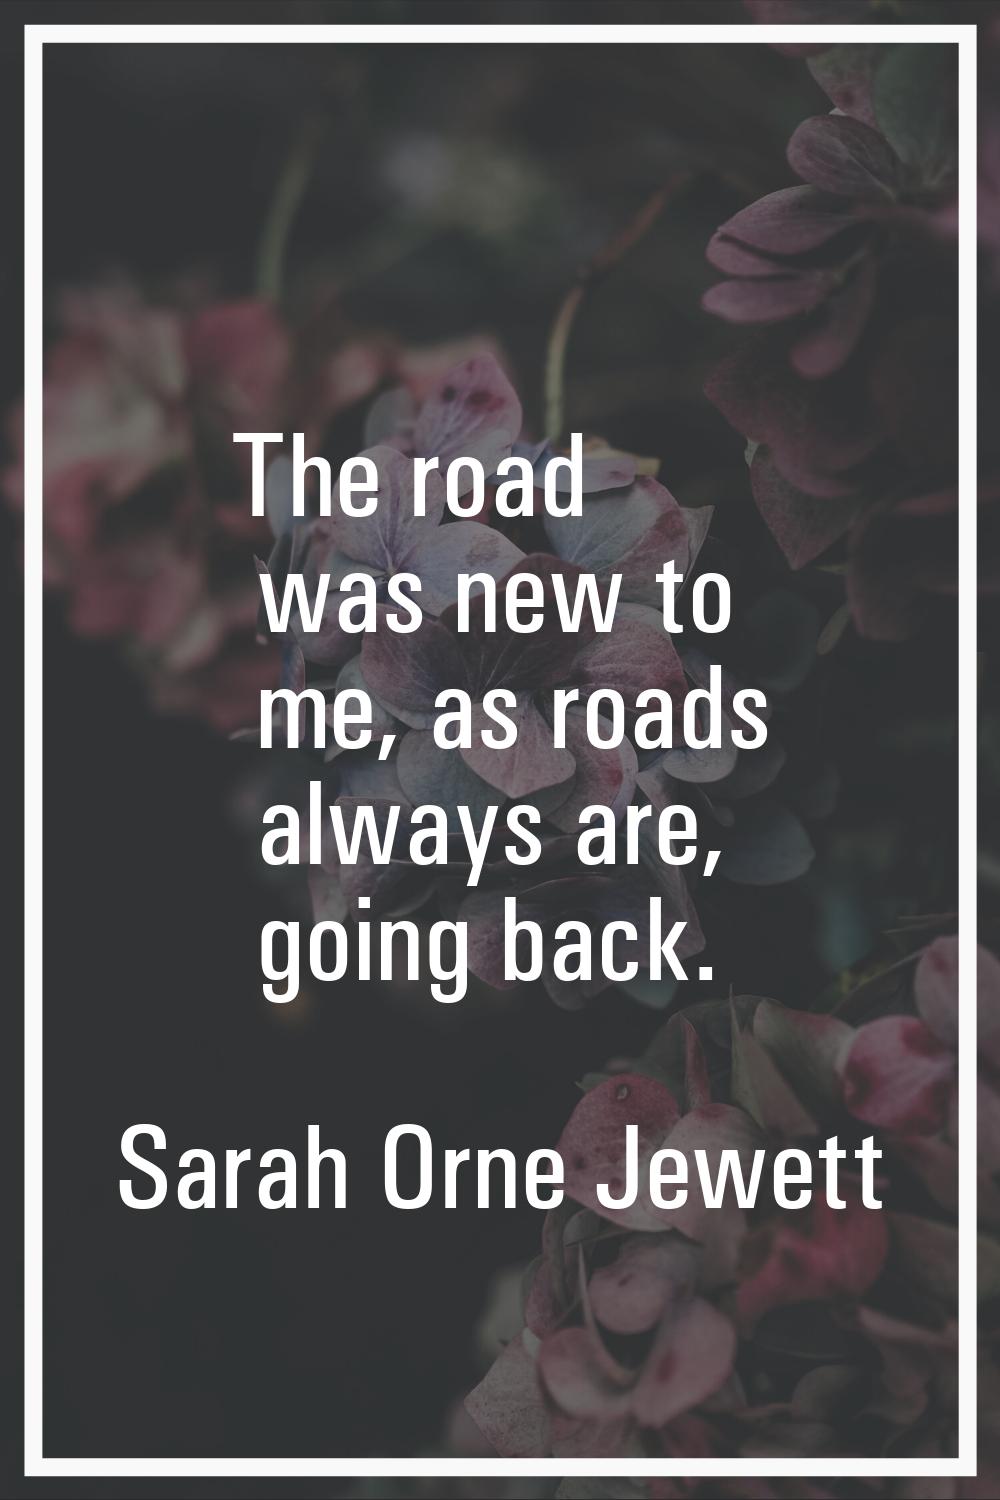 The road was new to me, as roads always are, going back.